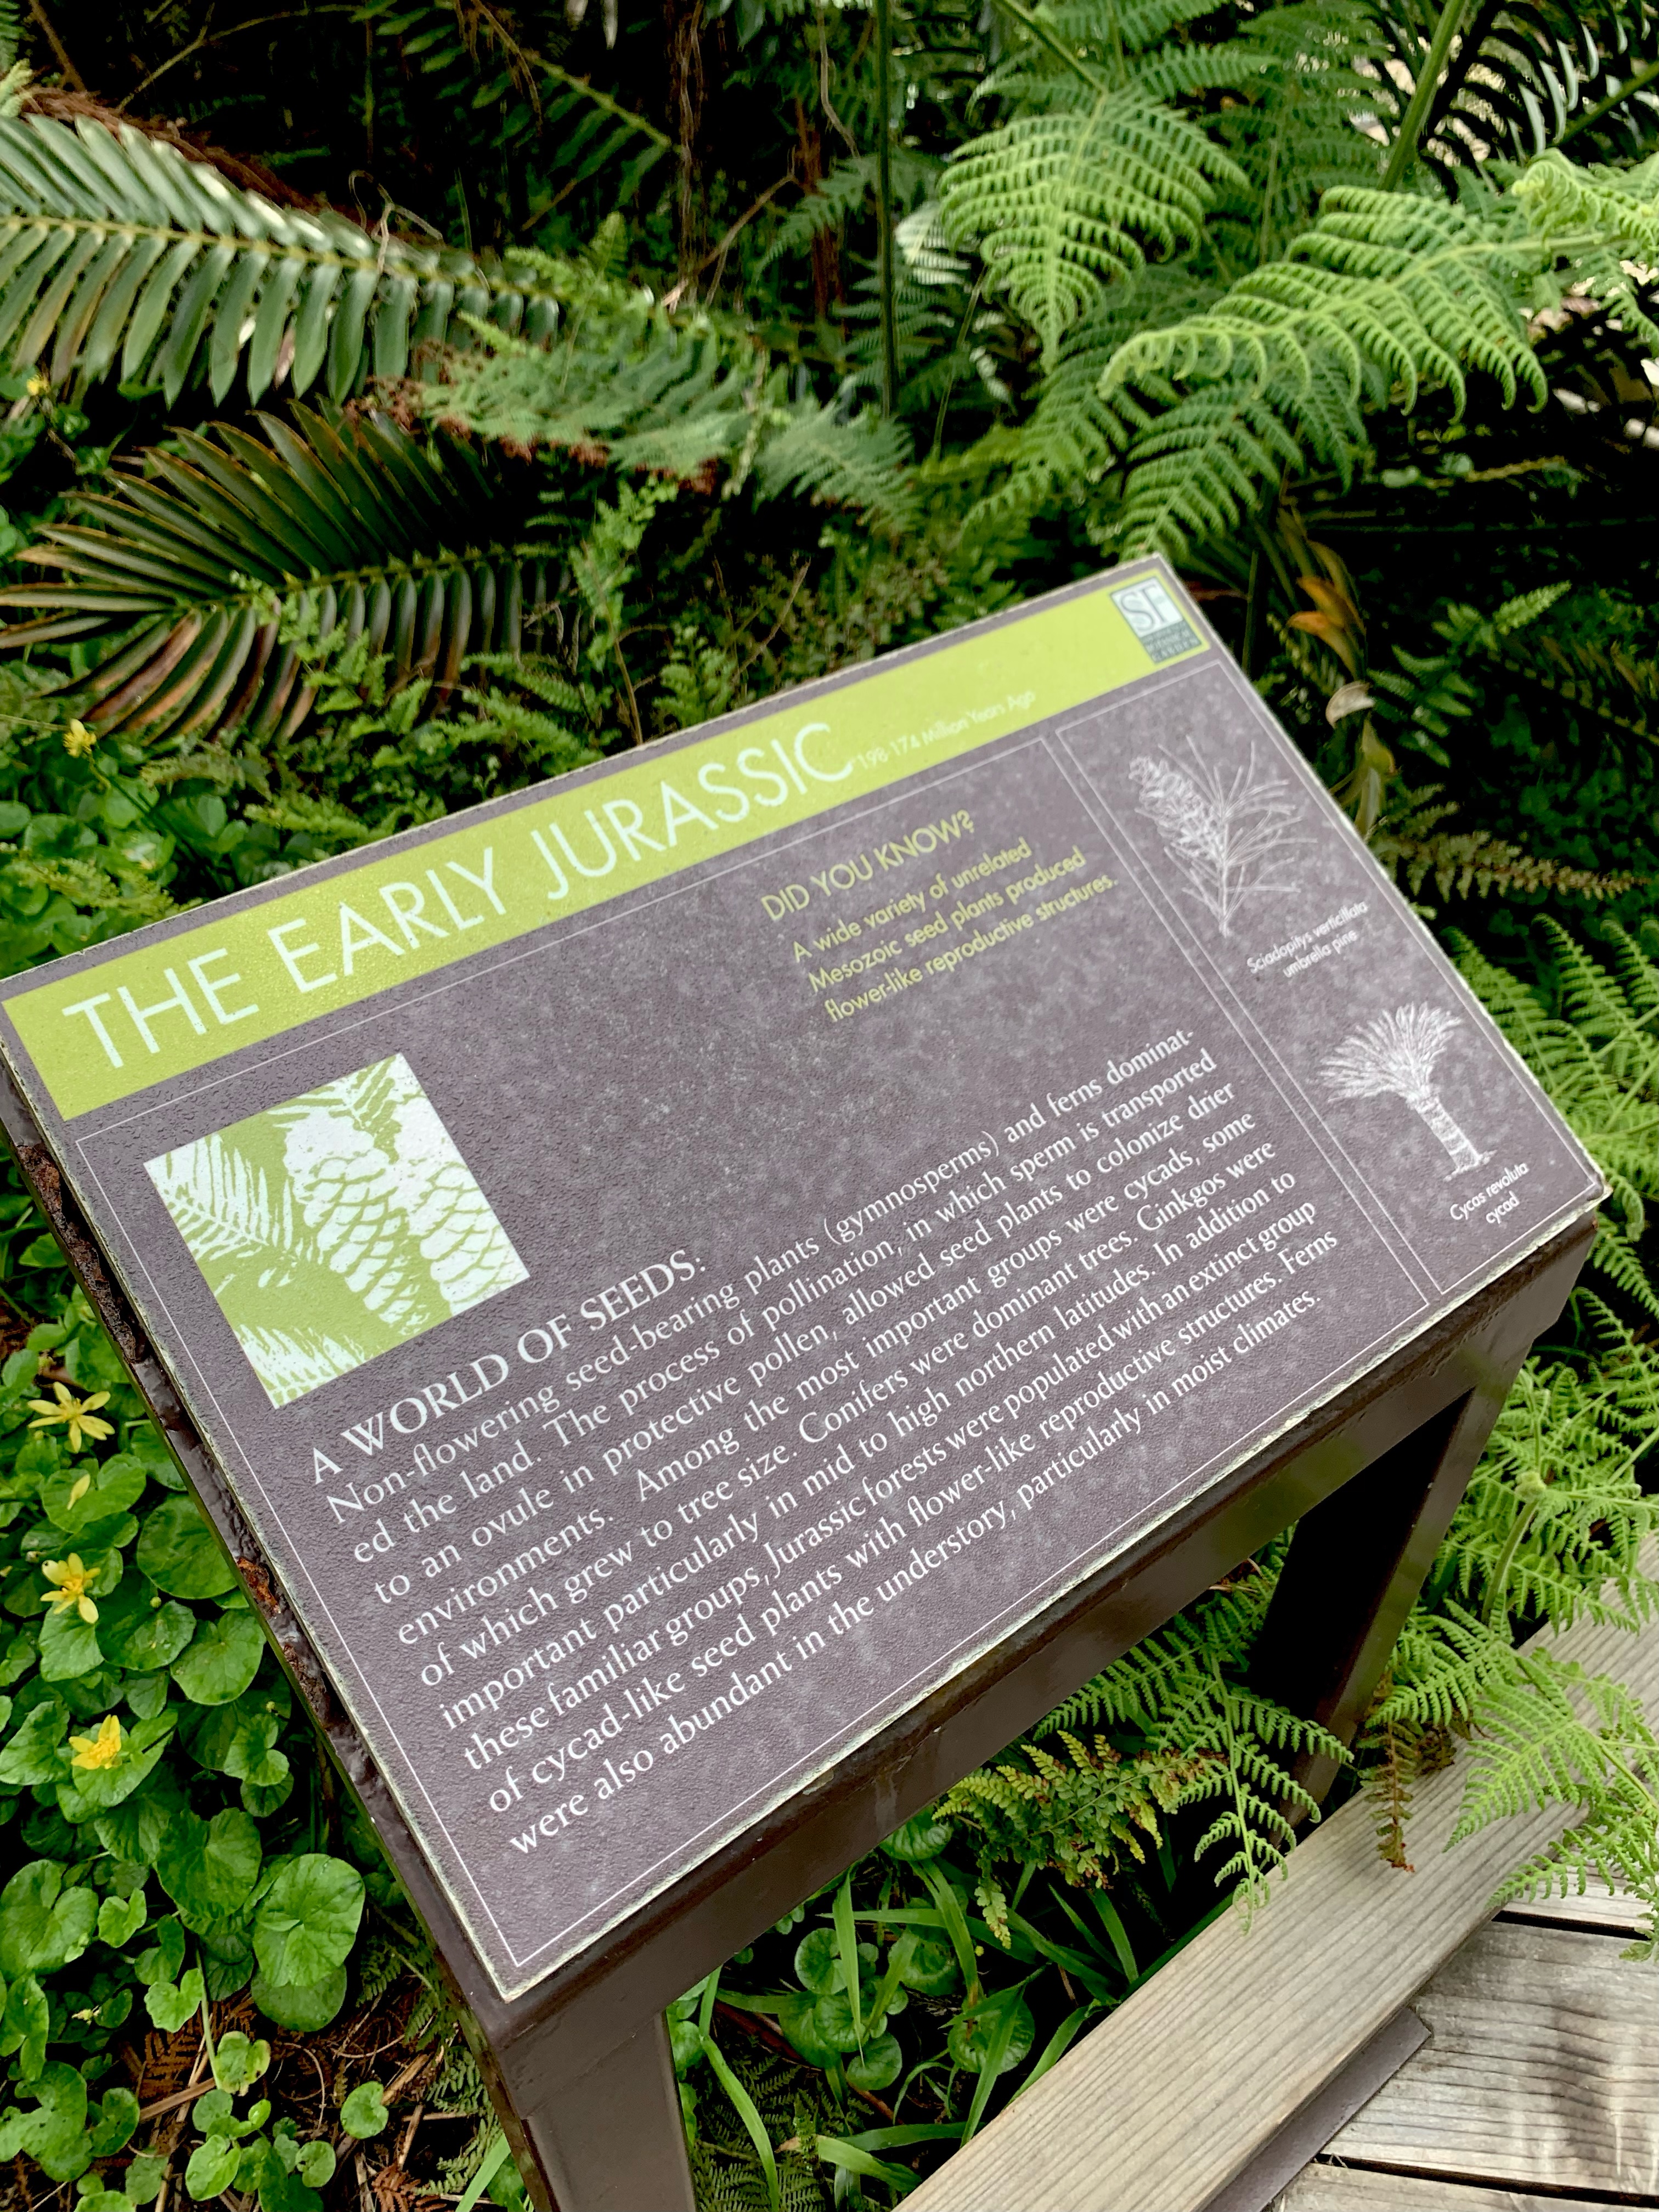 sign about the jurassic era